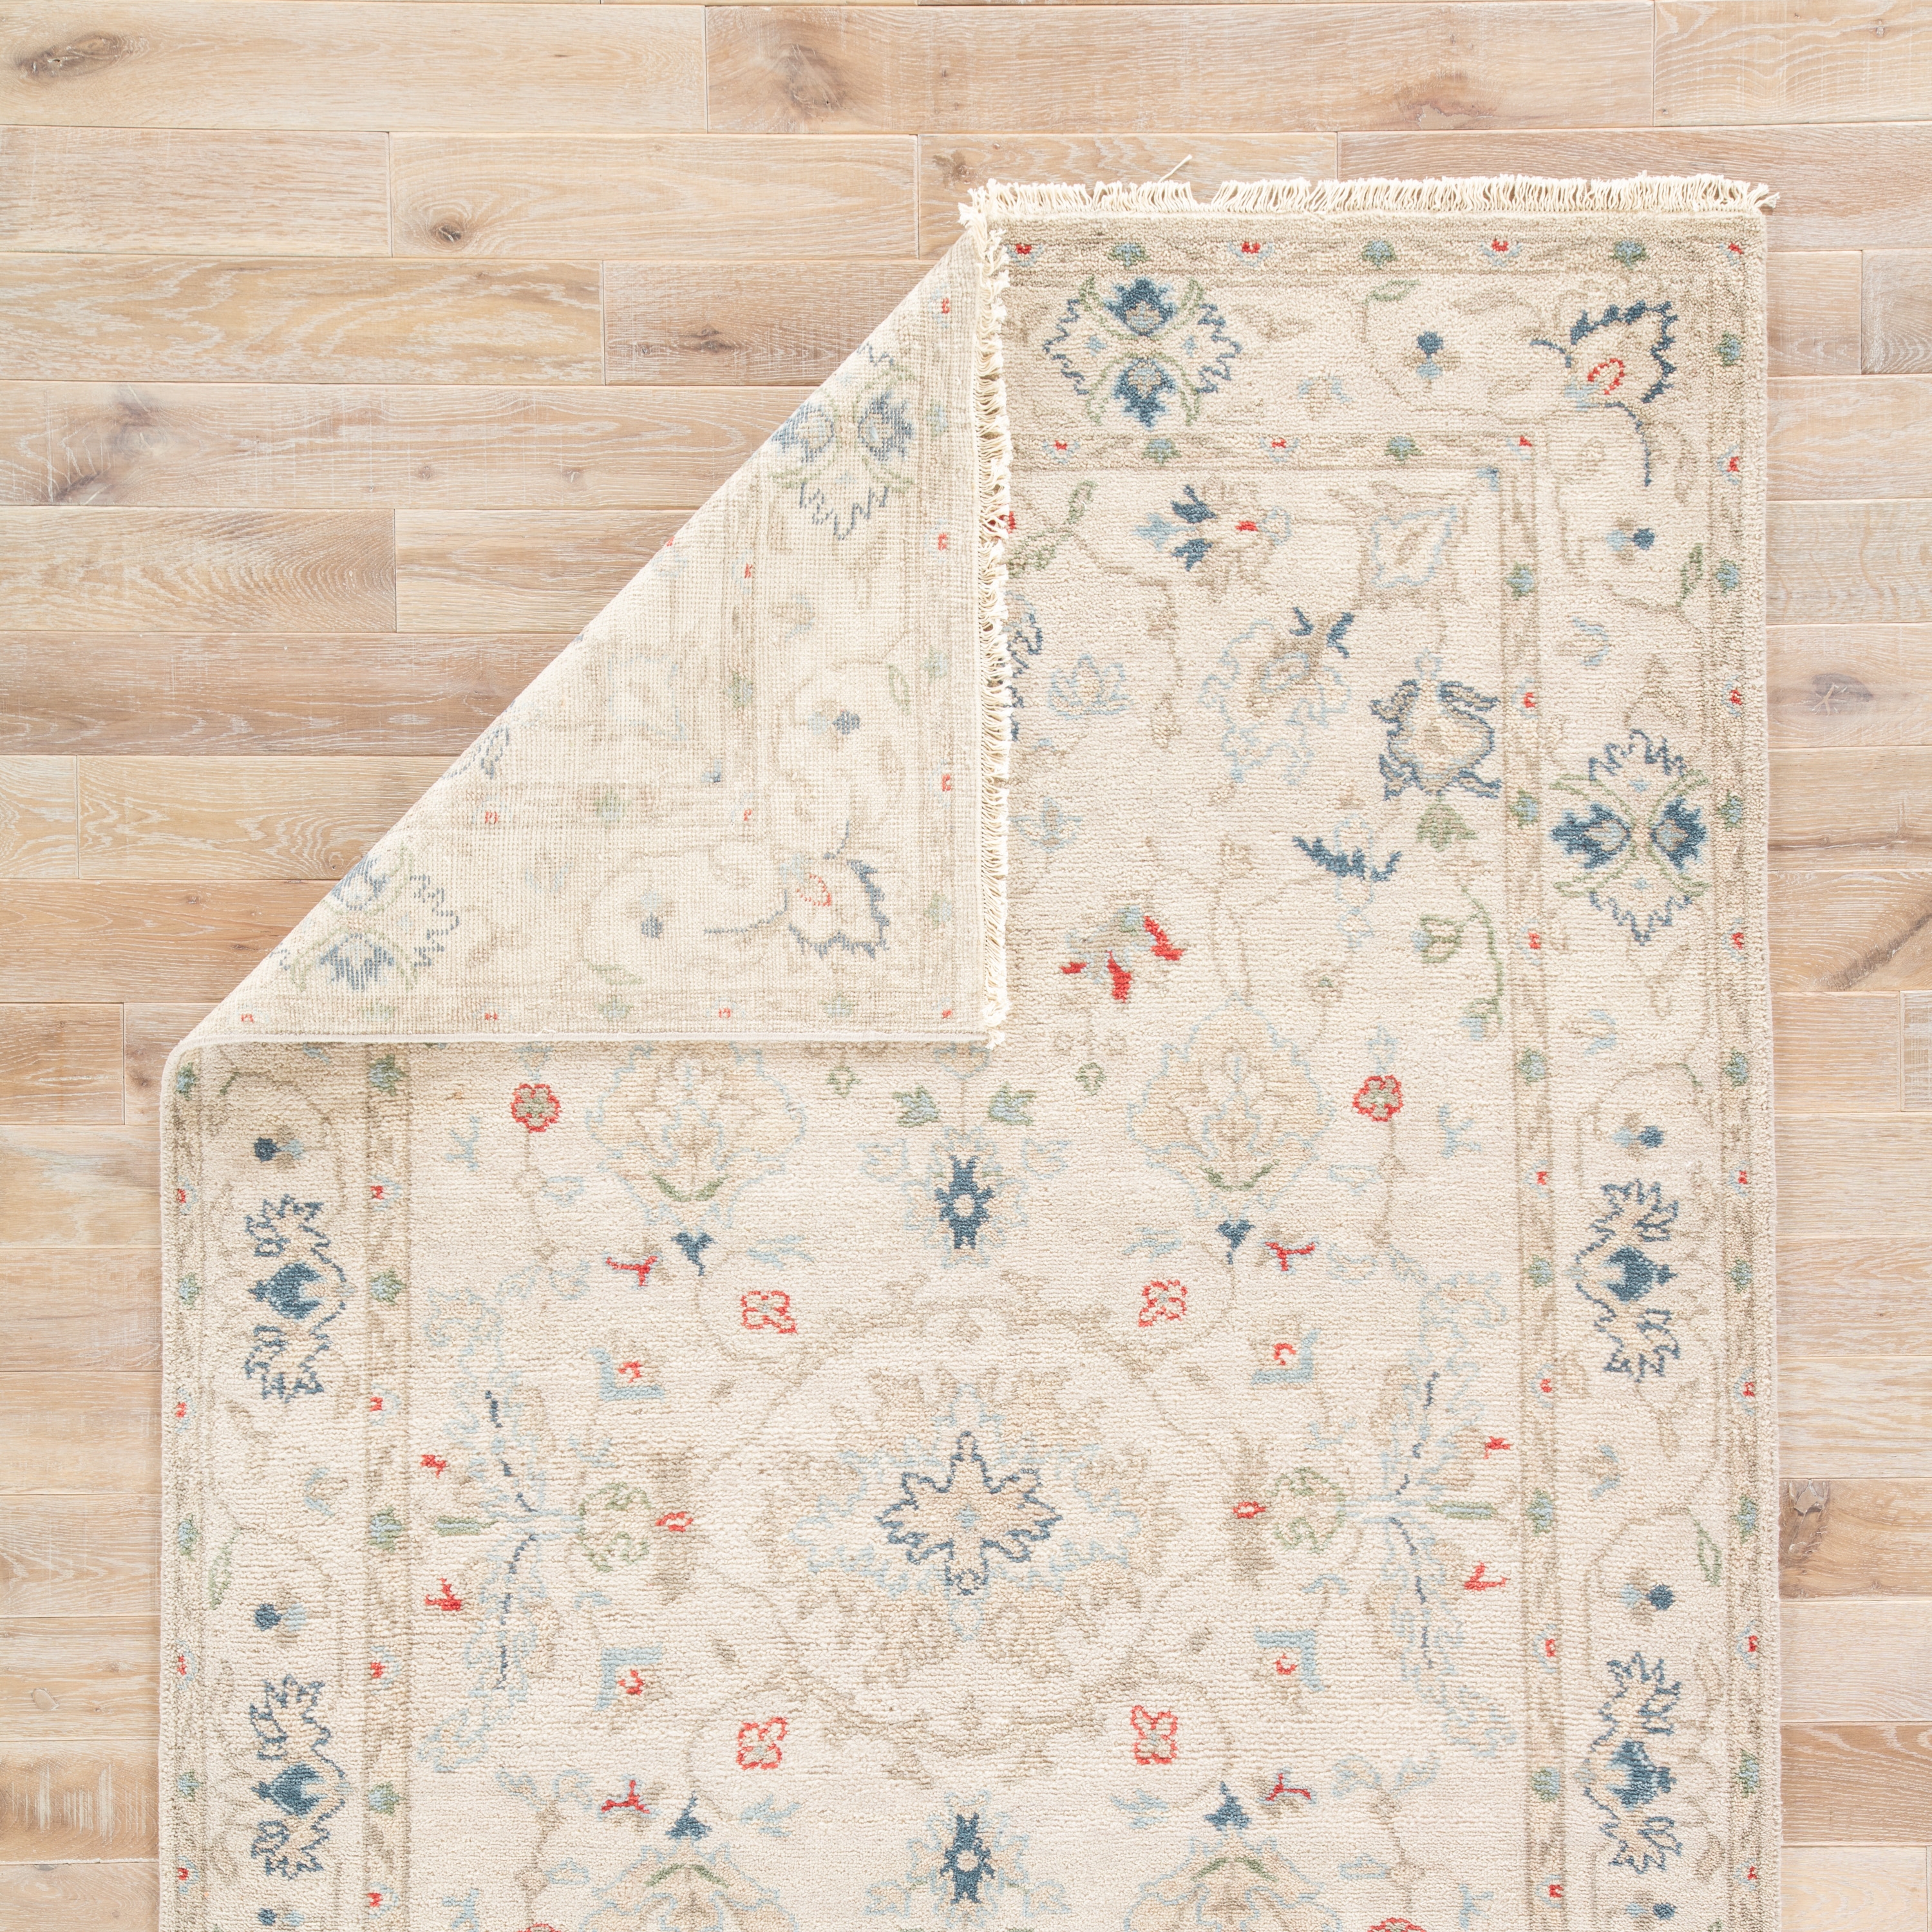 Hacci Hand-Knotted Floral Cream/ Blue Area Rug (8' X 10') - Image 2